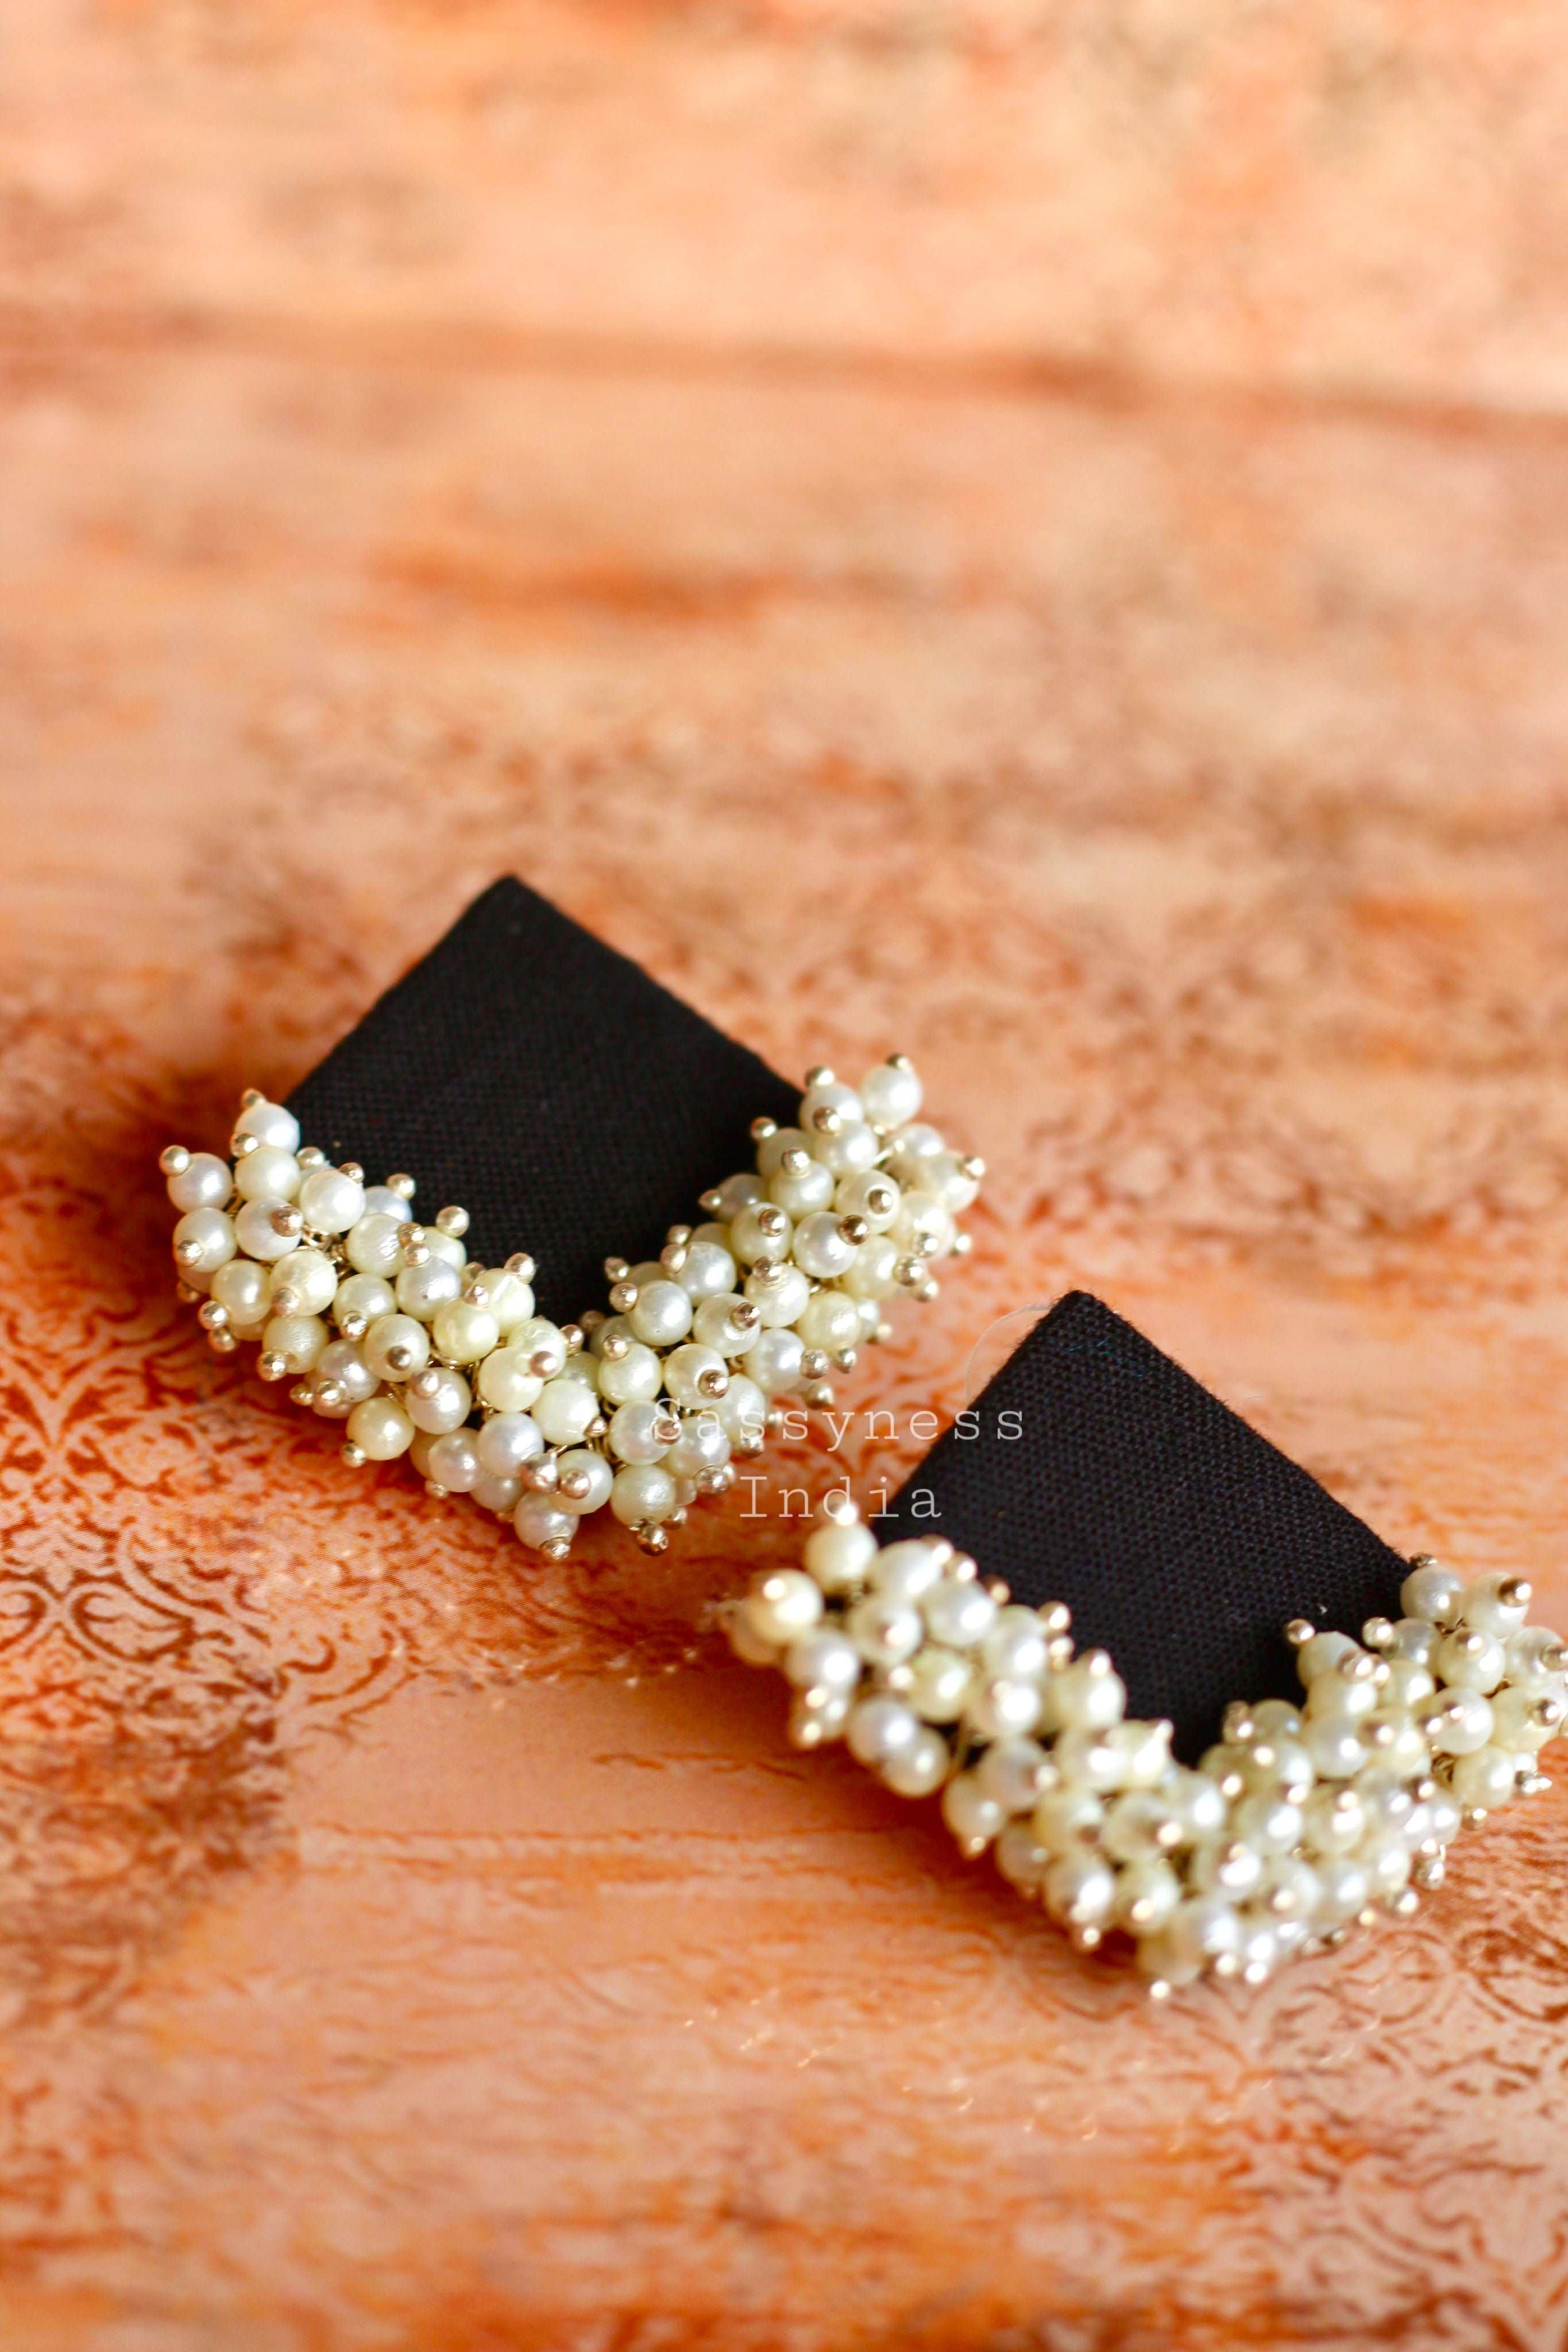 Buy Jewels Galaxy Stylish BestSelling Candy Shaped Black And White Stud  Earrings Set of 2 Online at Low Prices in India  Paytmmallcom